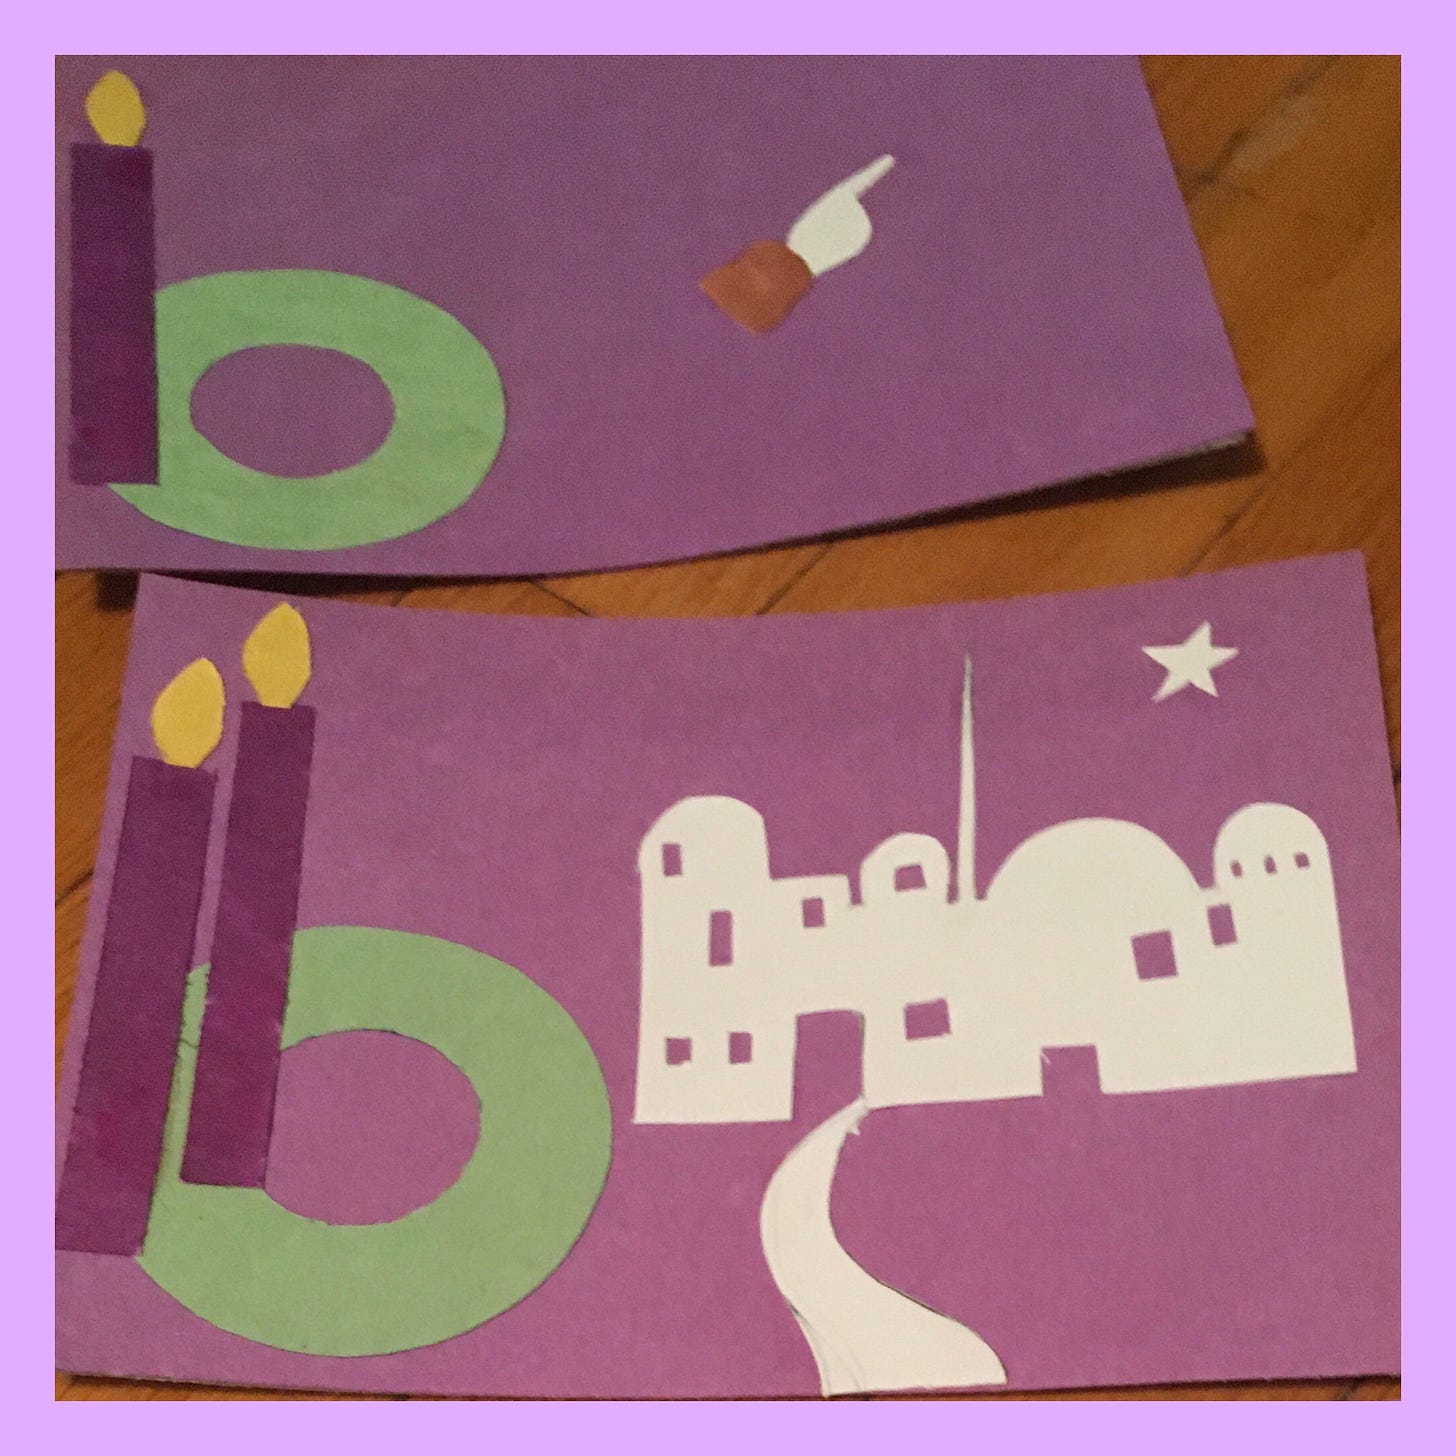 The first two cards of the Godly Play Advent story, featuring a pointing hand and the city of Bethlehem, and the first two candles on an advent wreath.